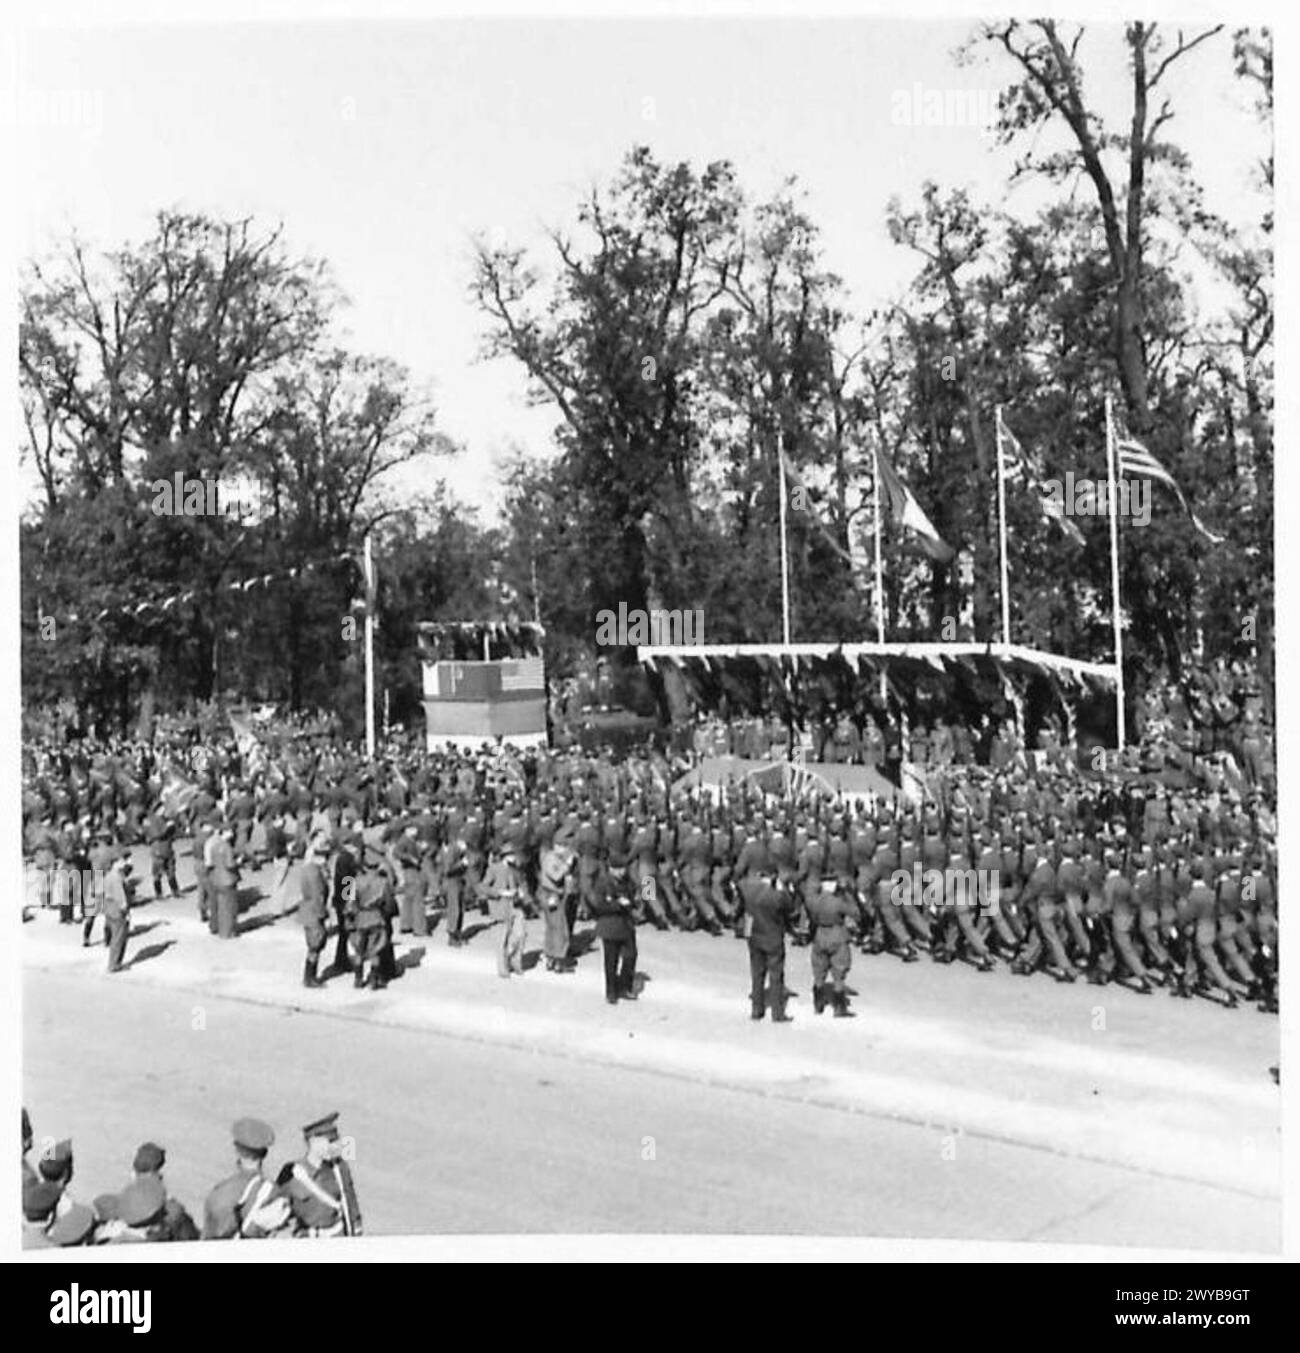 'V.J.' DAY : FOUR NATIONS PARADE - Original wartime caption: U.S. Infantry pass the saluting base. Photographic negative , British Army of the Rhine Stock Photo